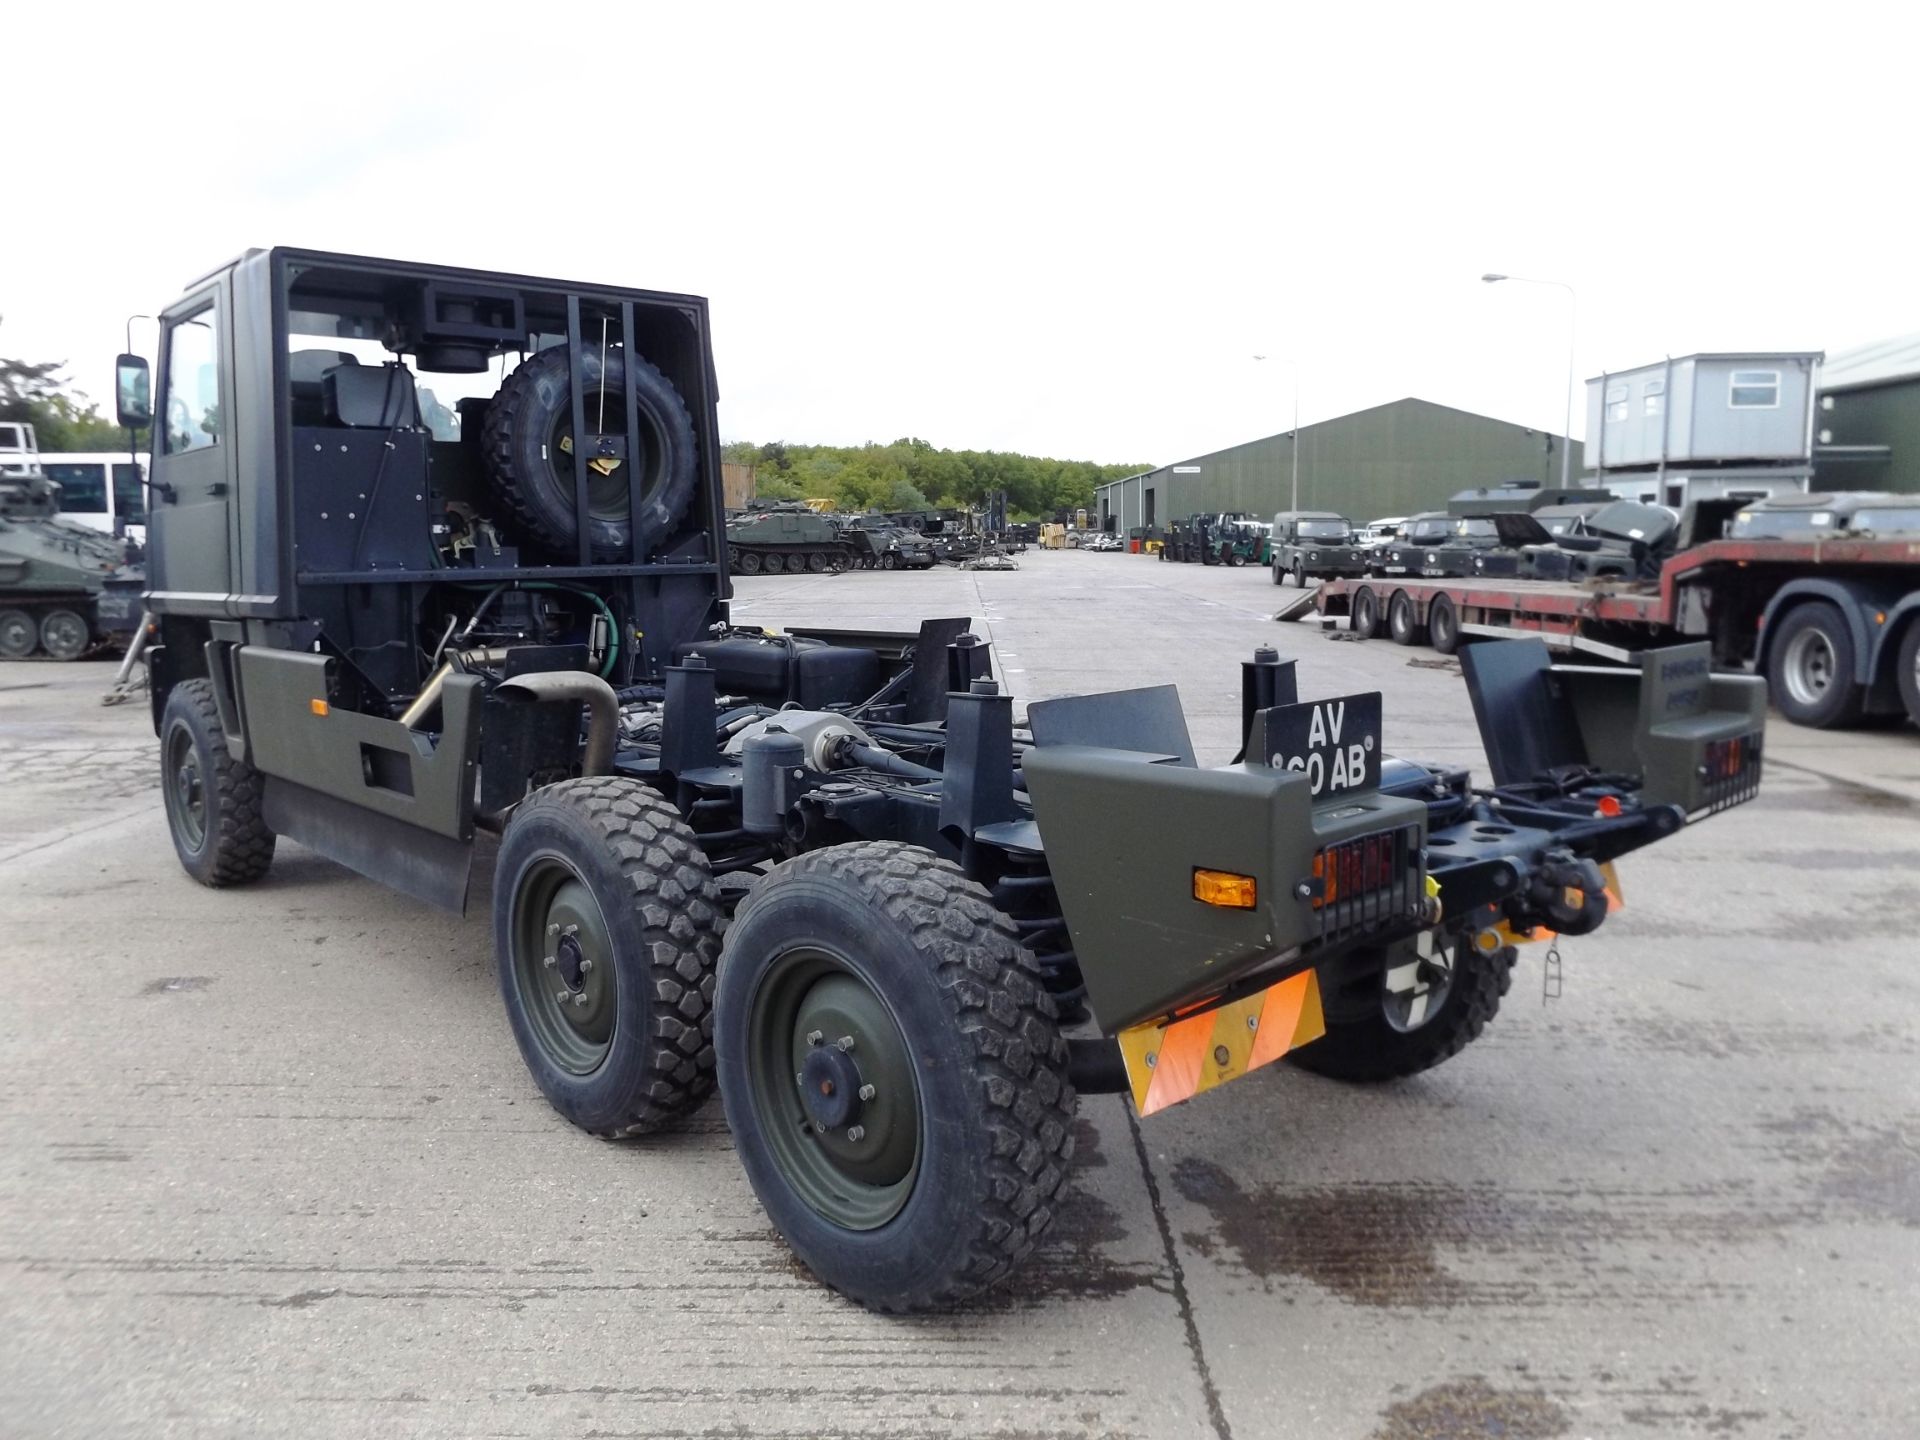 Ex Reserve Left Hand Drive Mowag Bucher Duro II 6x6 High-Mobility Tactical Vehicle - Image 5 of 18